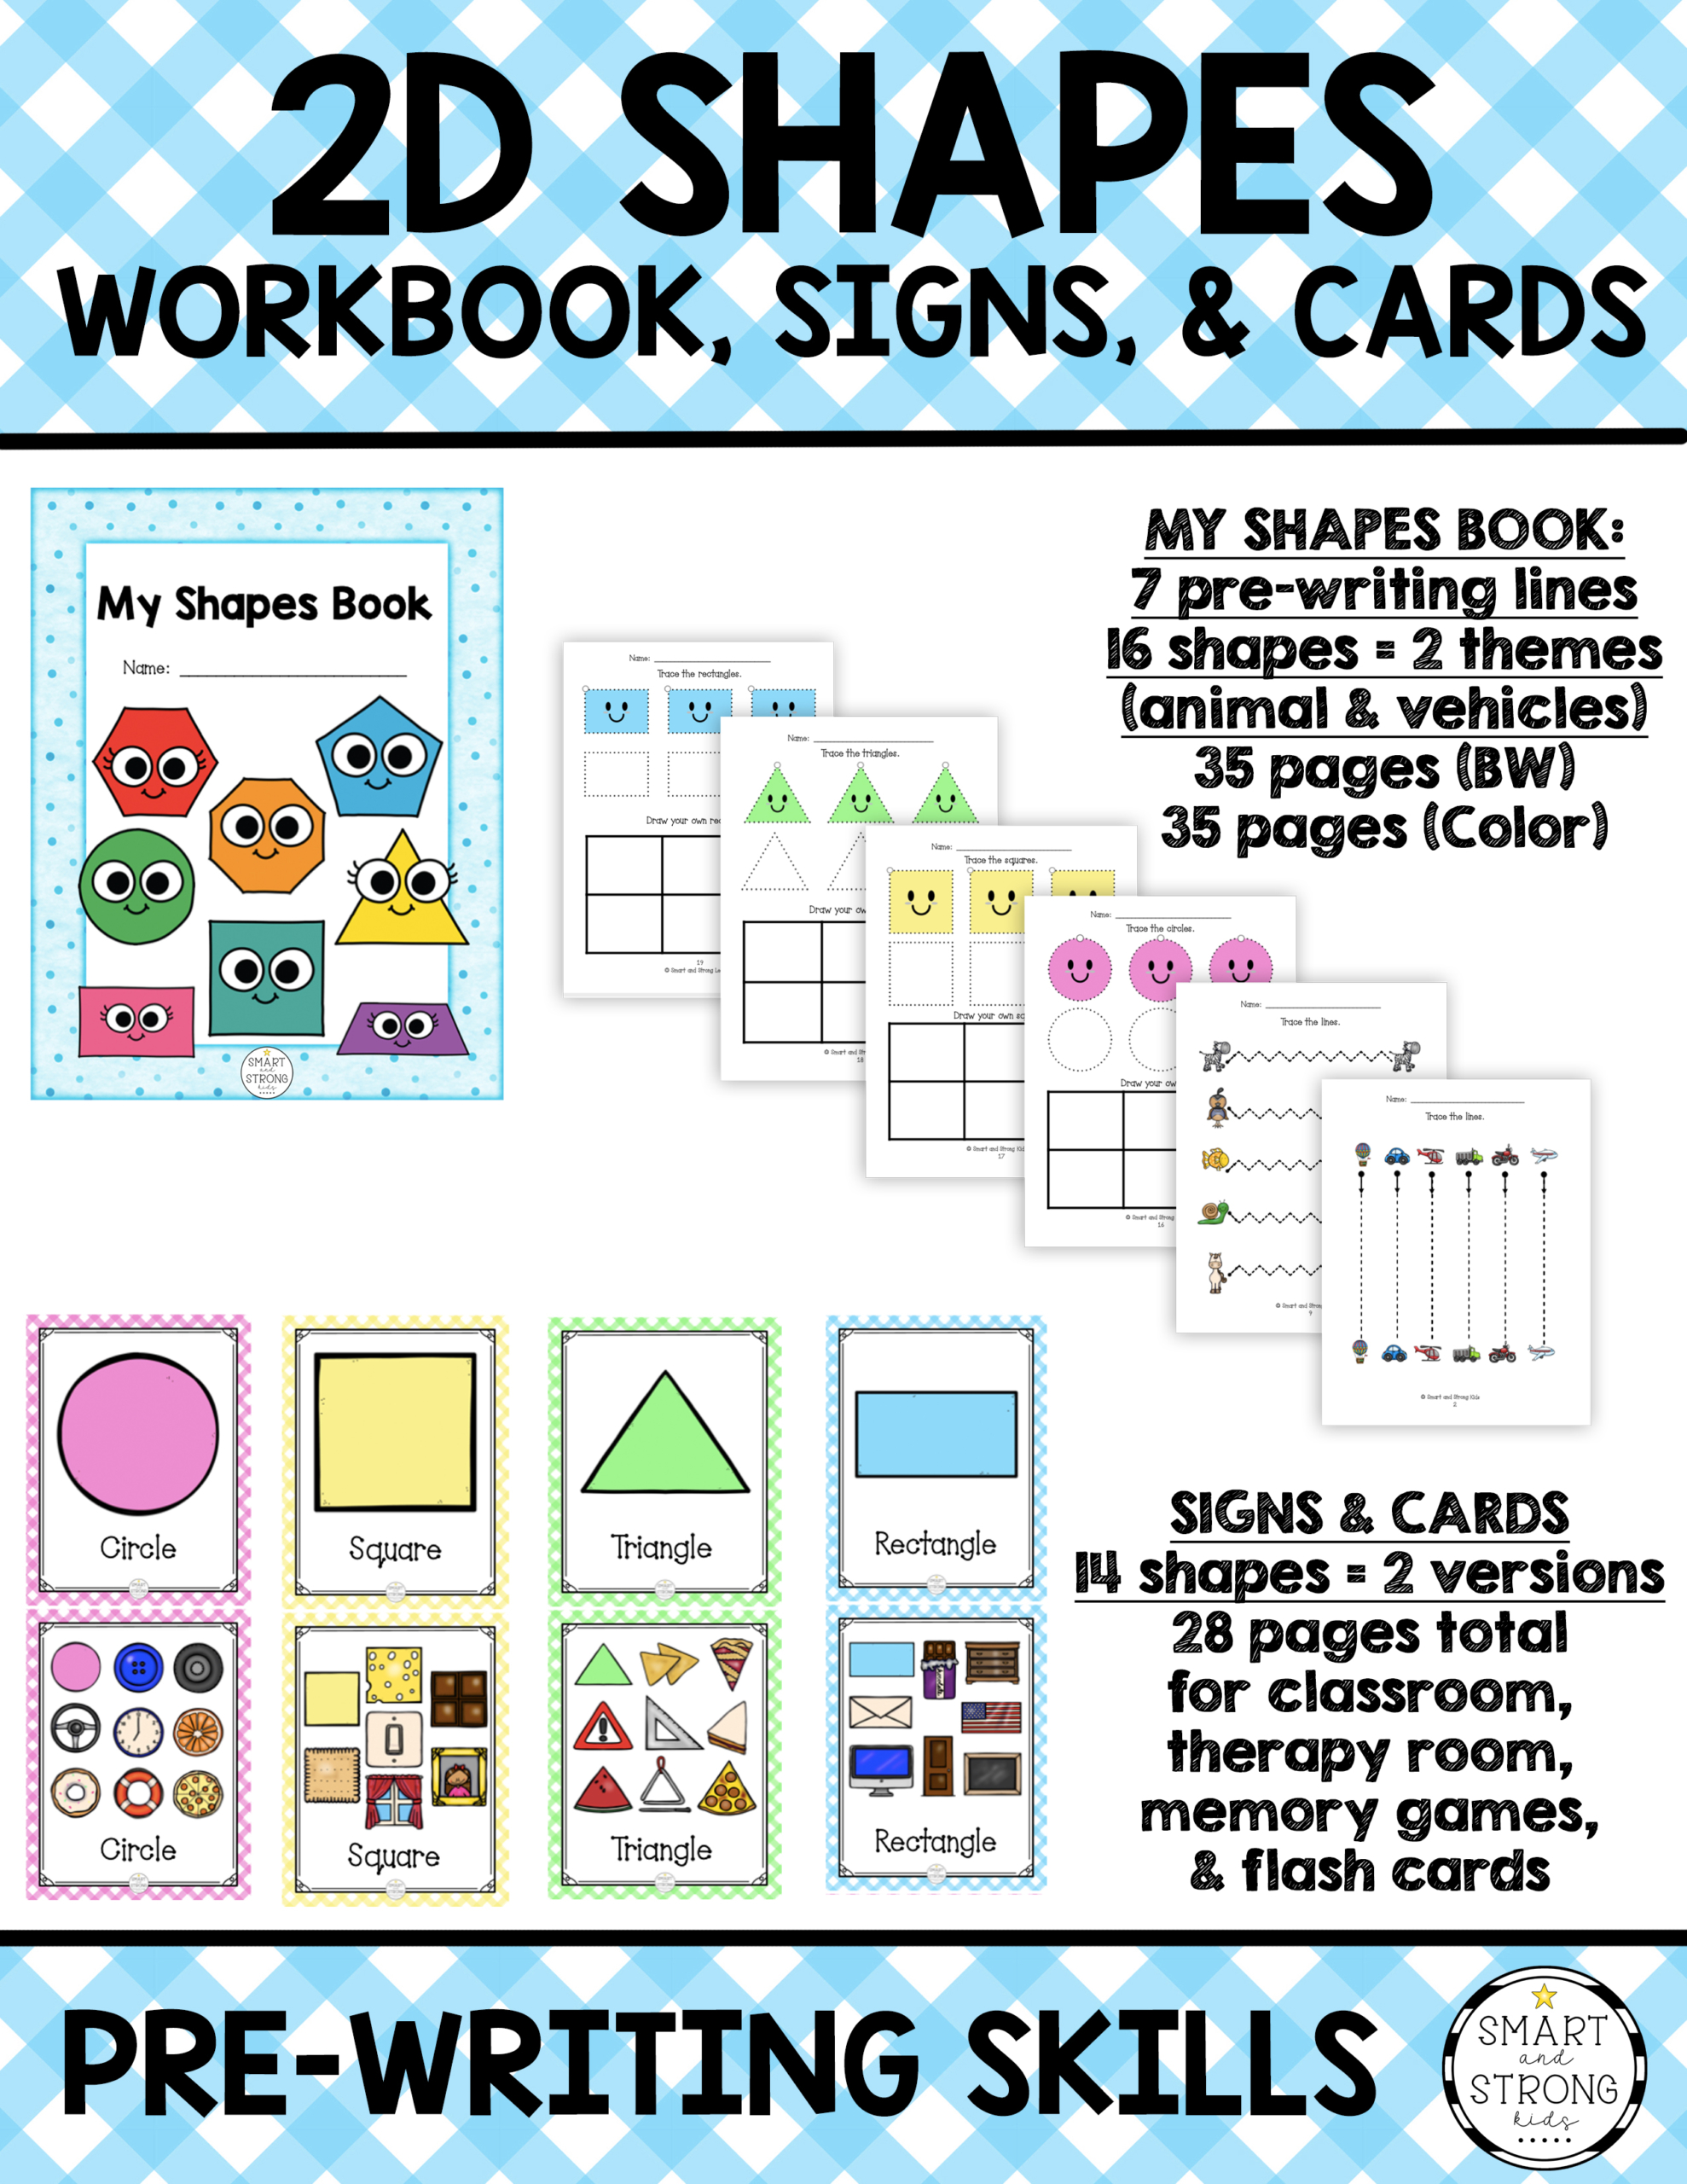 D shapes worksheets pdf signs and cards